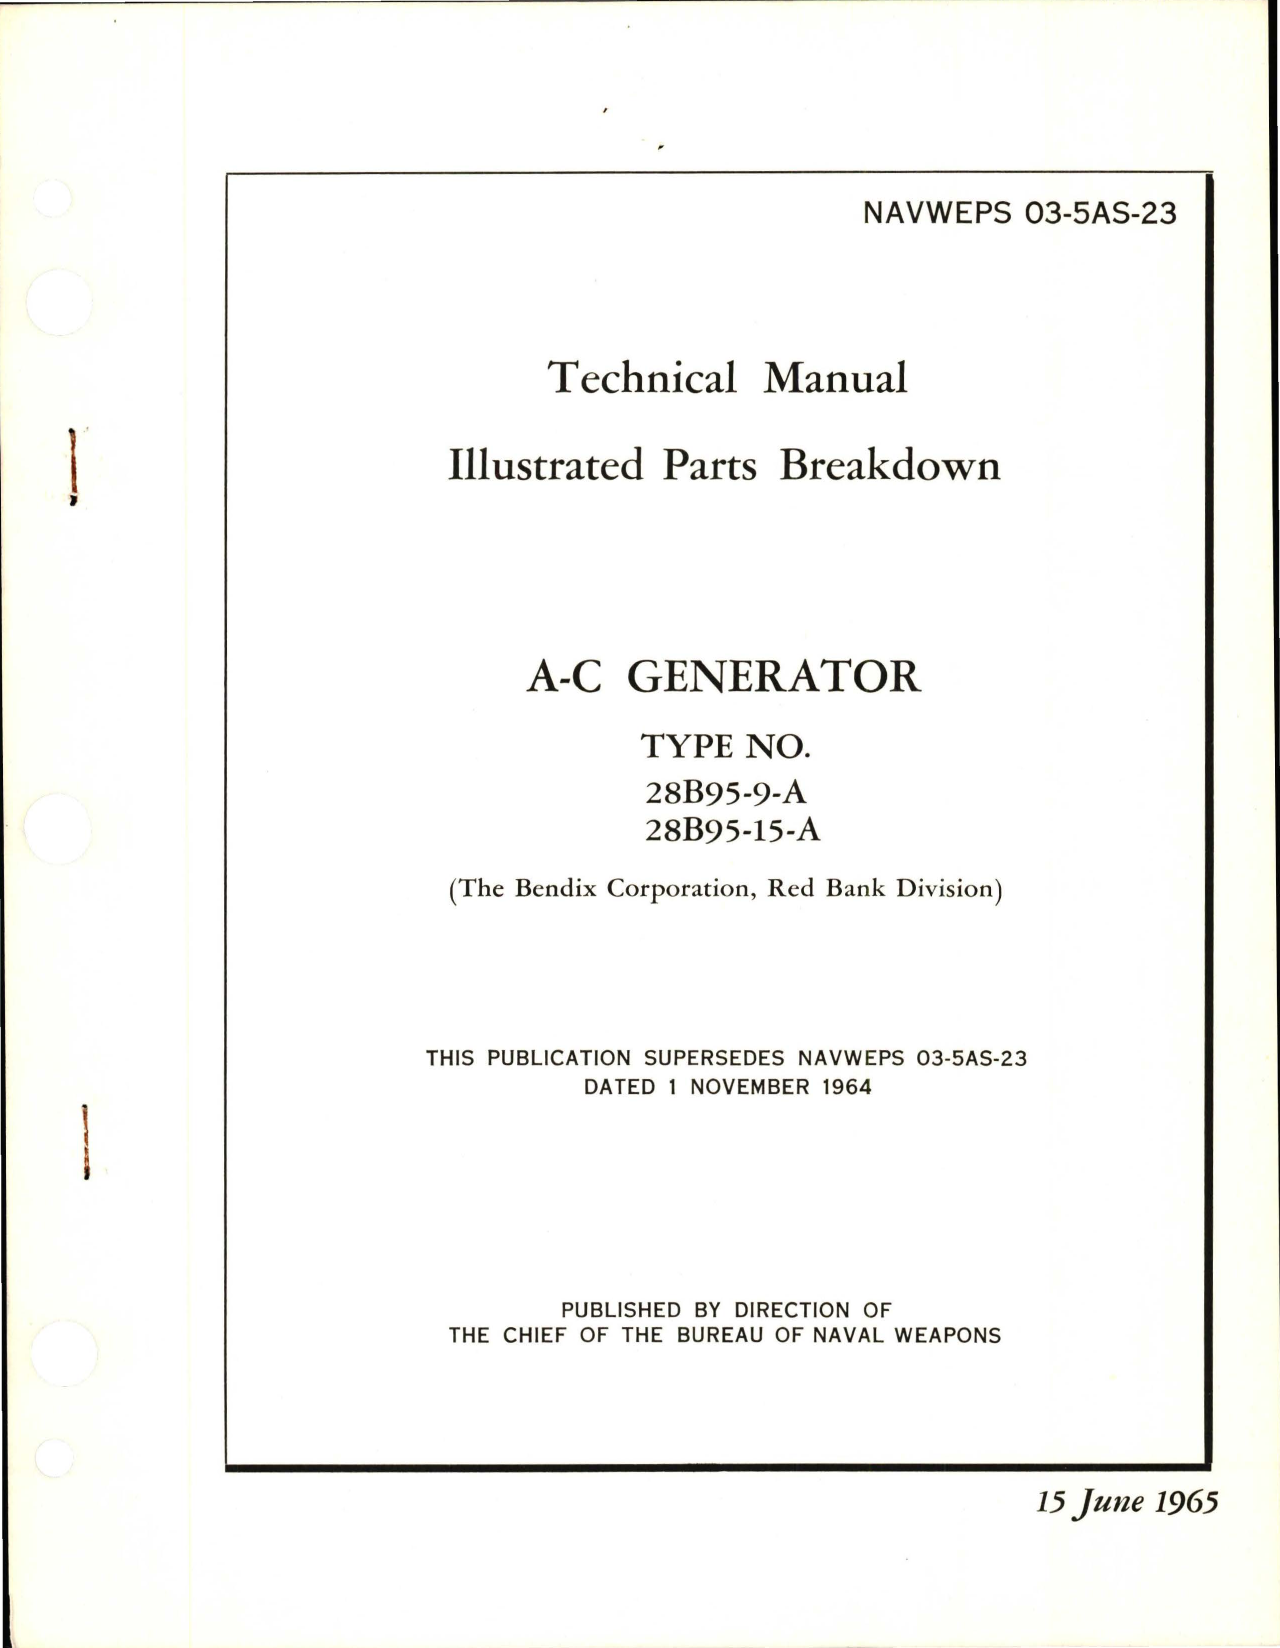 Sample page 1 from AirCorps Library document: Illustrated Parts Breakdown for AC Generator - Types 28B95-9-A and 28B95-15-A